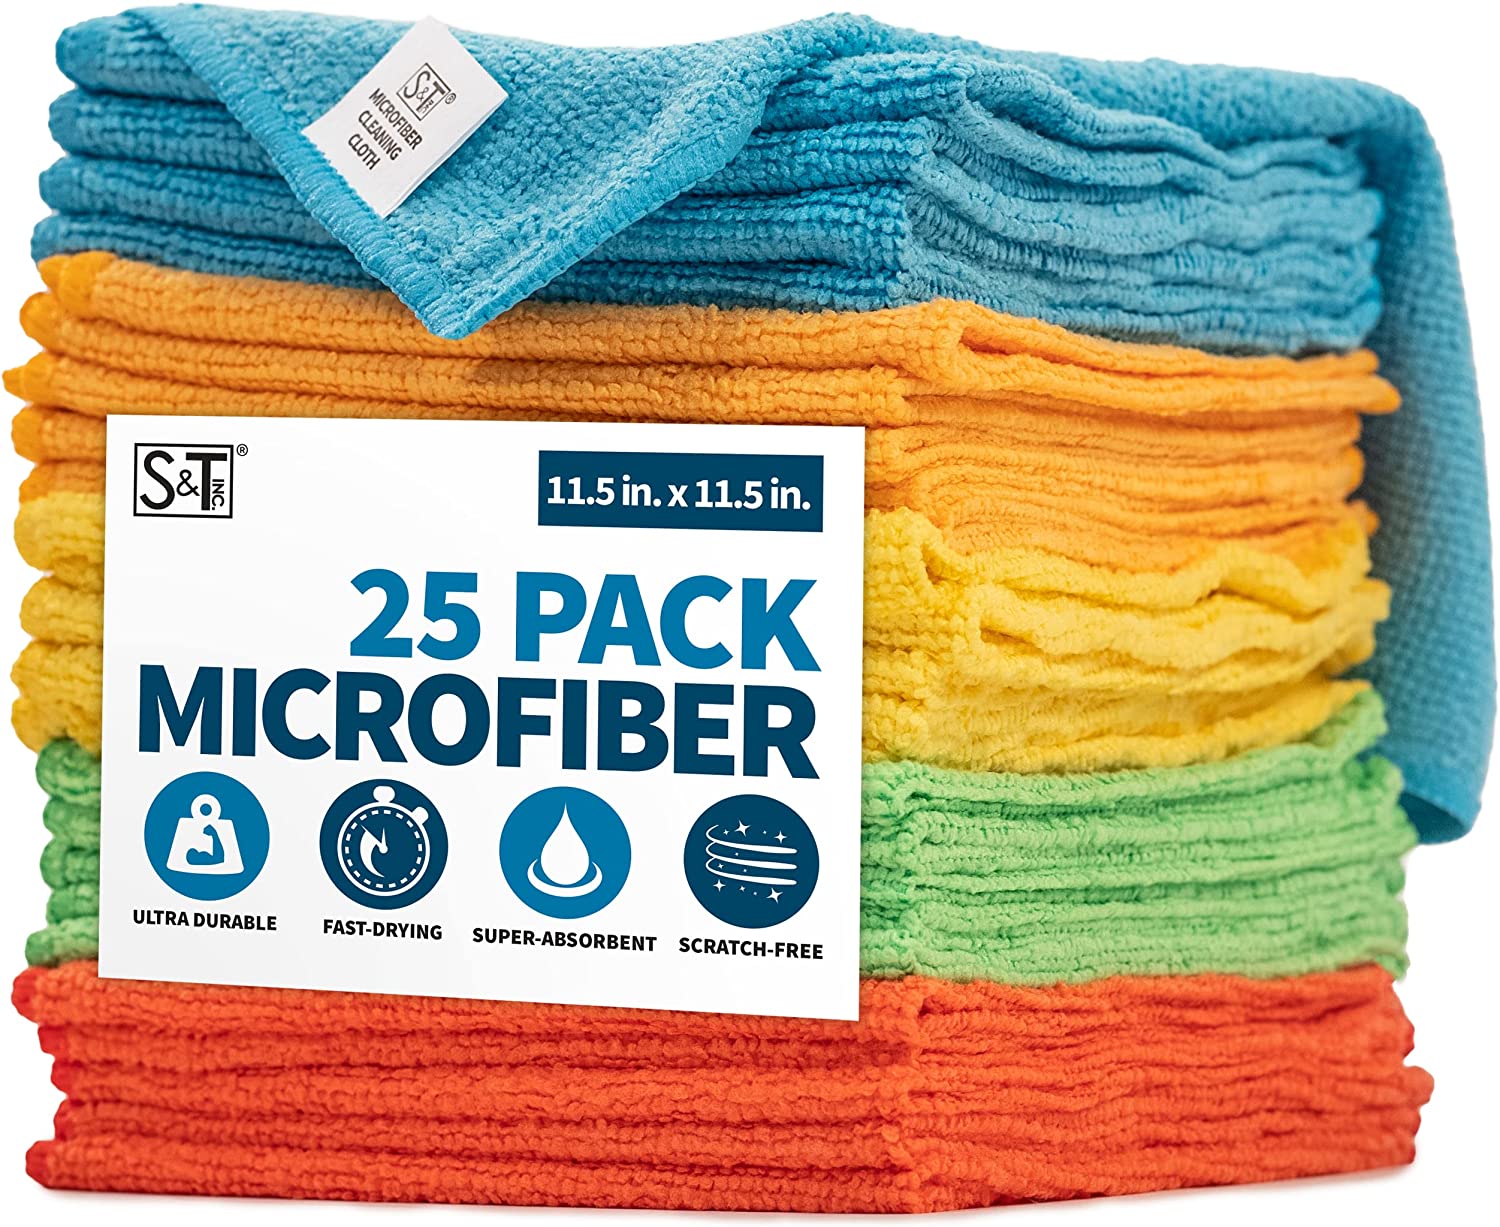 S&T Inc. 12 Pack Microfiber Cleaning Cloth, Bulk Microfiber Towel for Home, Reusable and Lint Free Cloth Towels for Car, Assorted Colors, 12 inch x